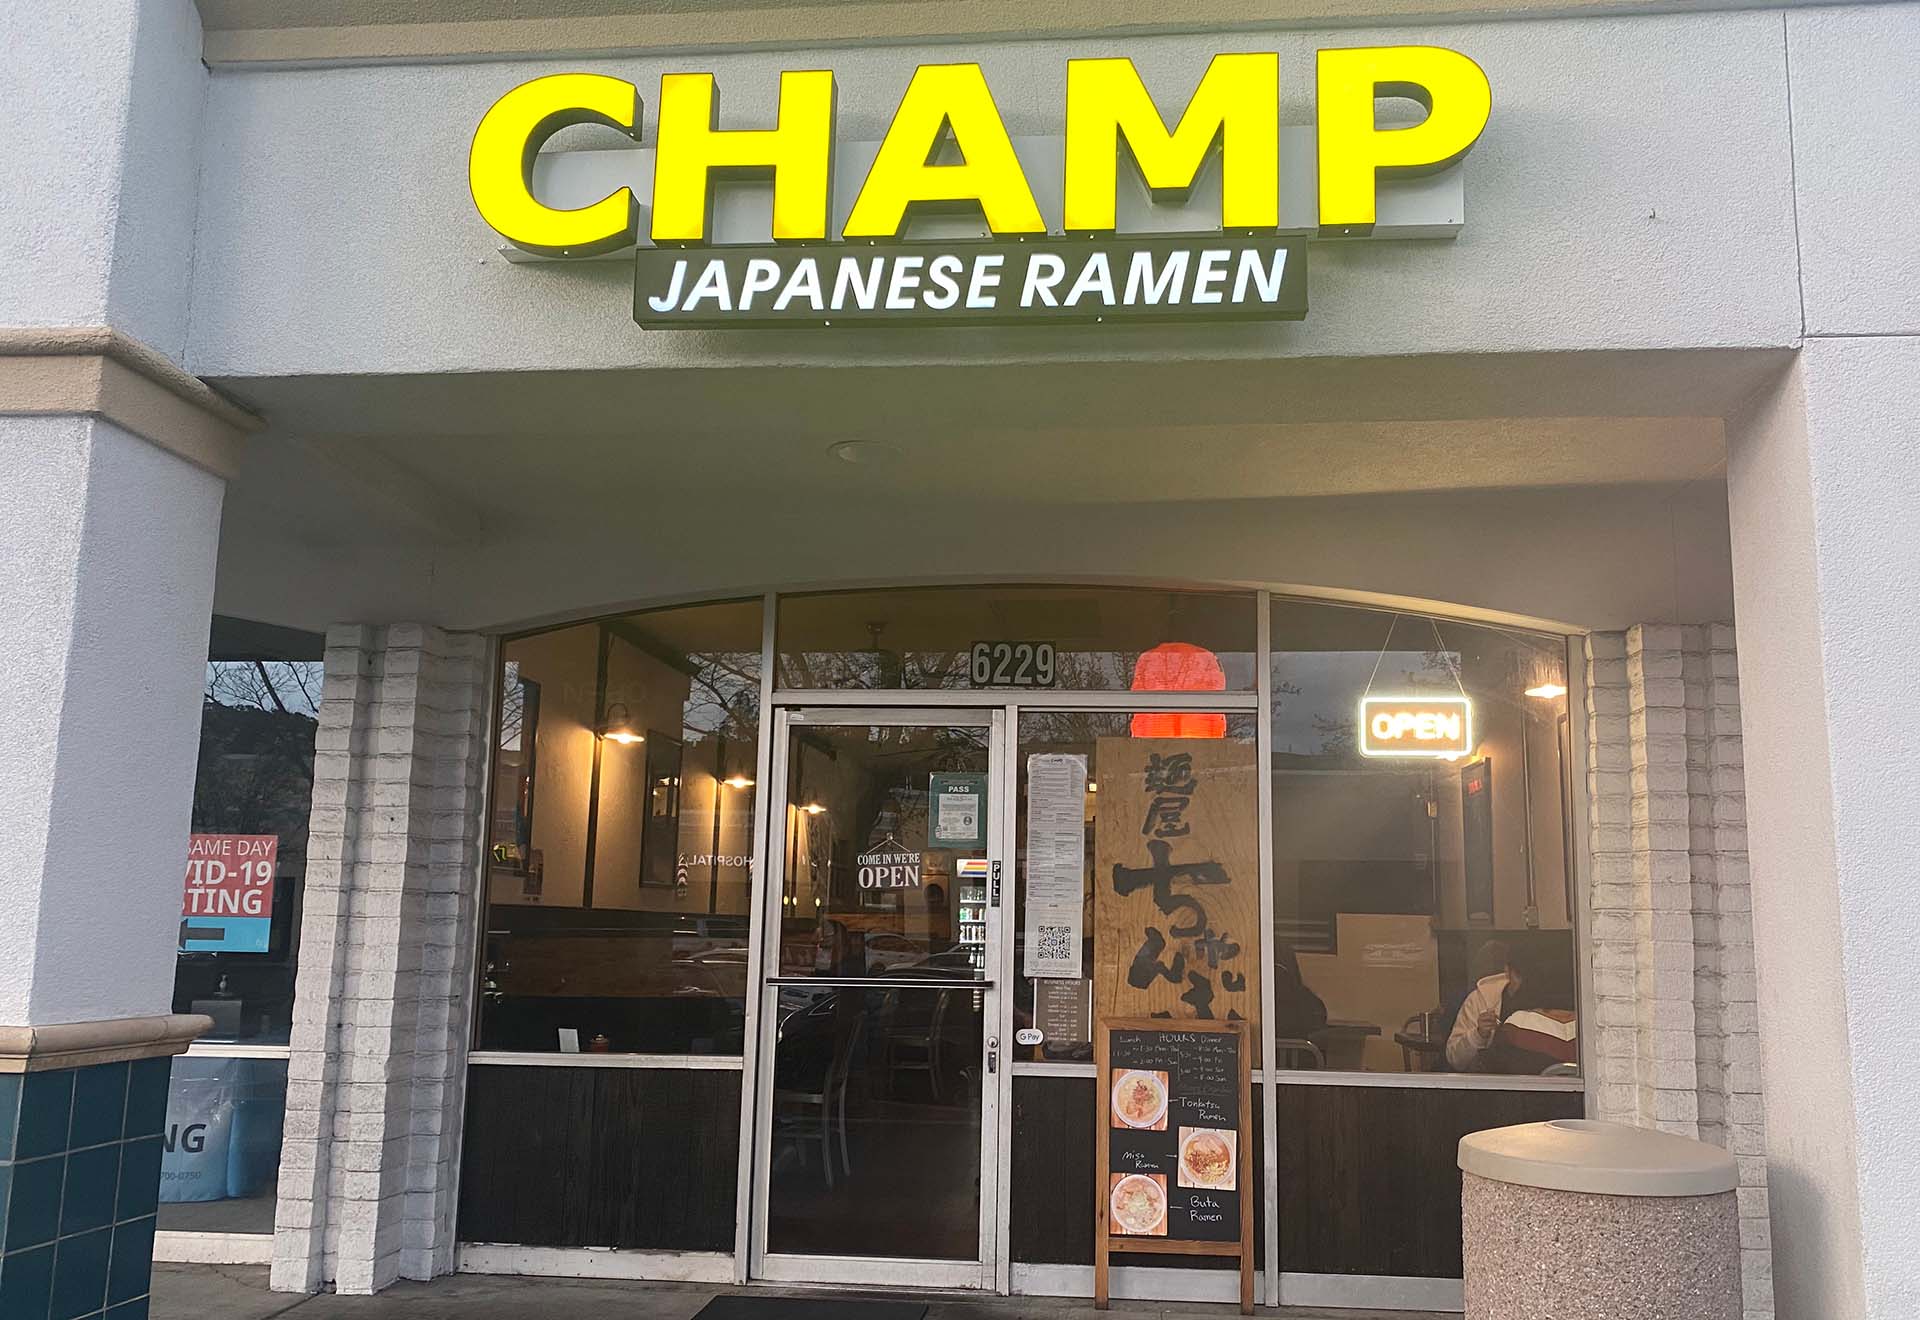 Exterior of a ramen restaurant. The sign reads "CHAMP" in bold yellow lettering, with "Japanese Ramen" in white underneath.